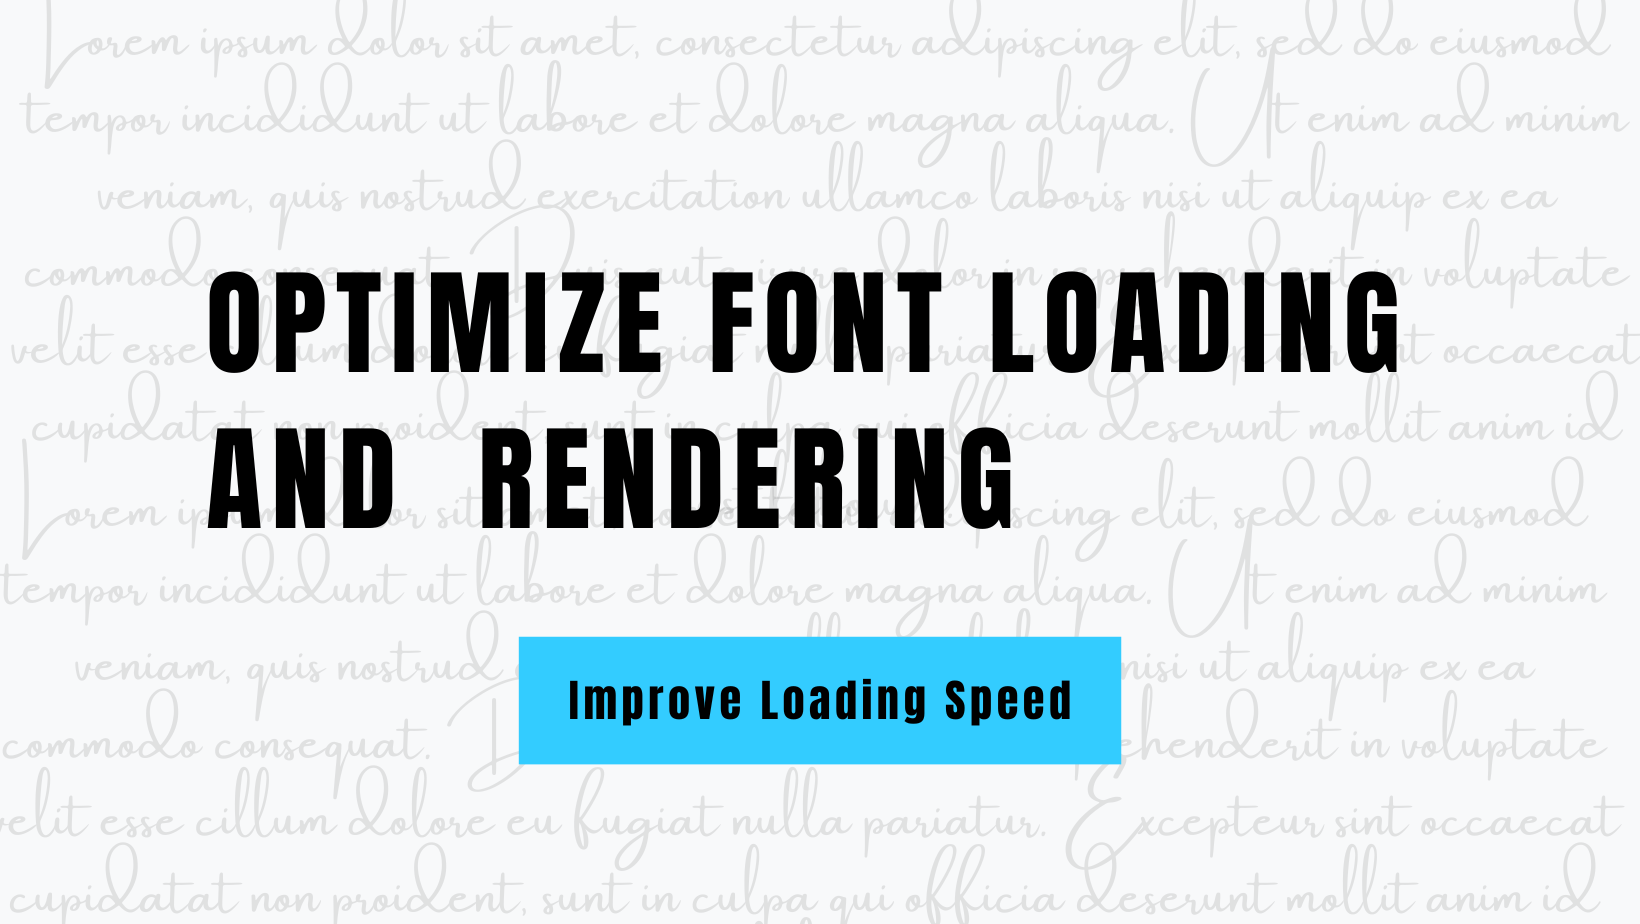 Optimize fonts loading and rendering on web application